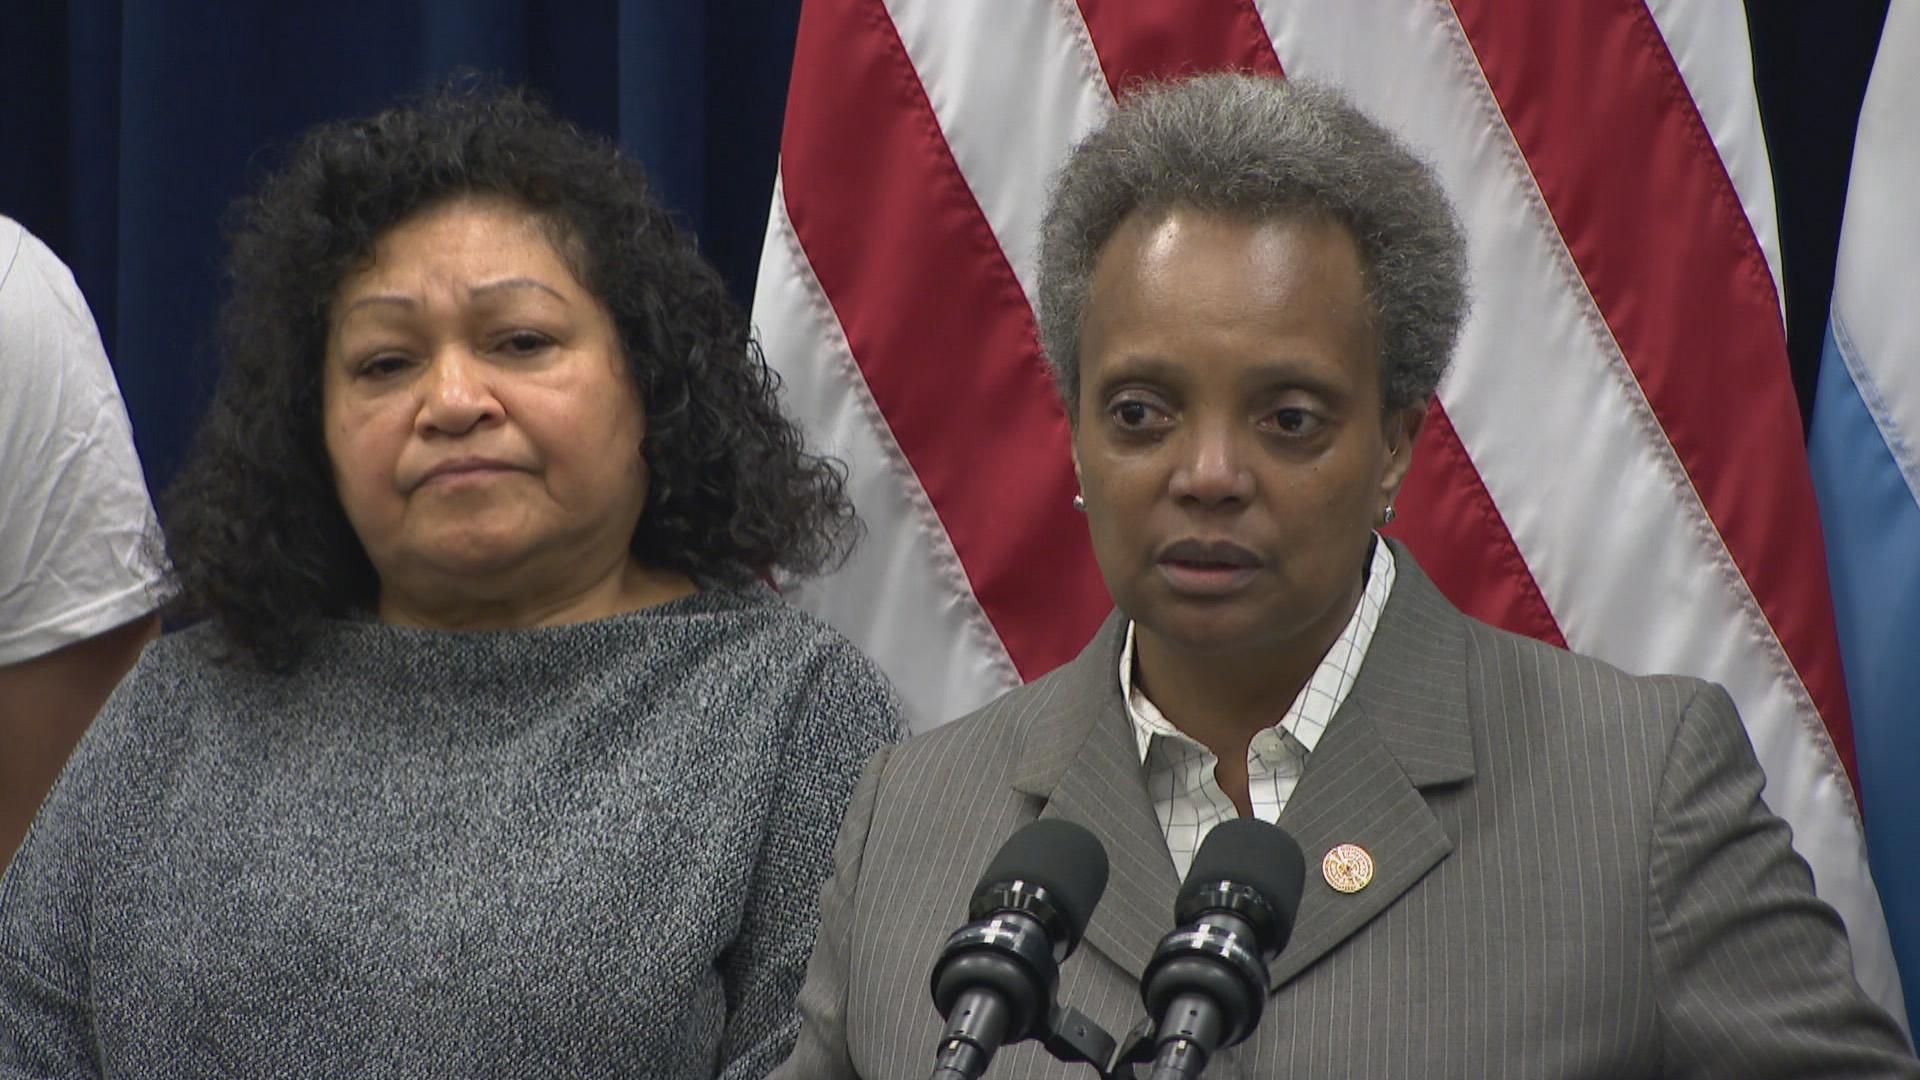 Mayor Lori Lightfoot speaks to the media after a City Council meeting on Wednesday, Jan. 15, 2020. (WTTW News)